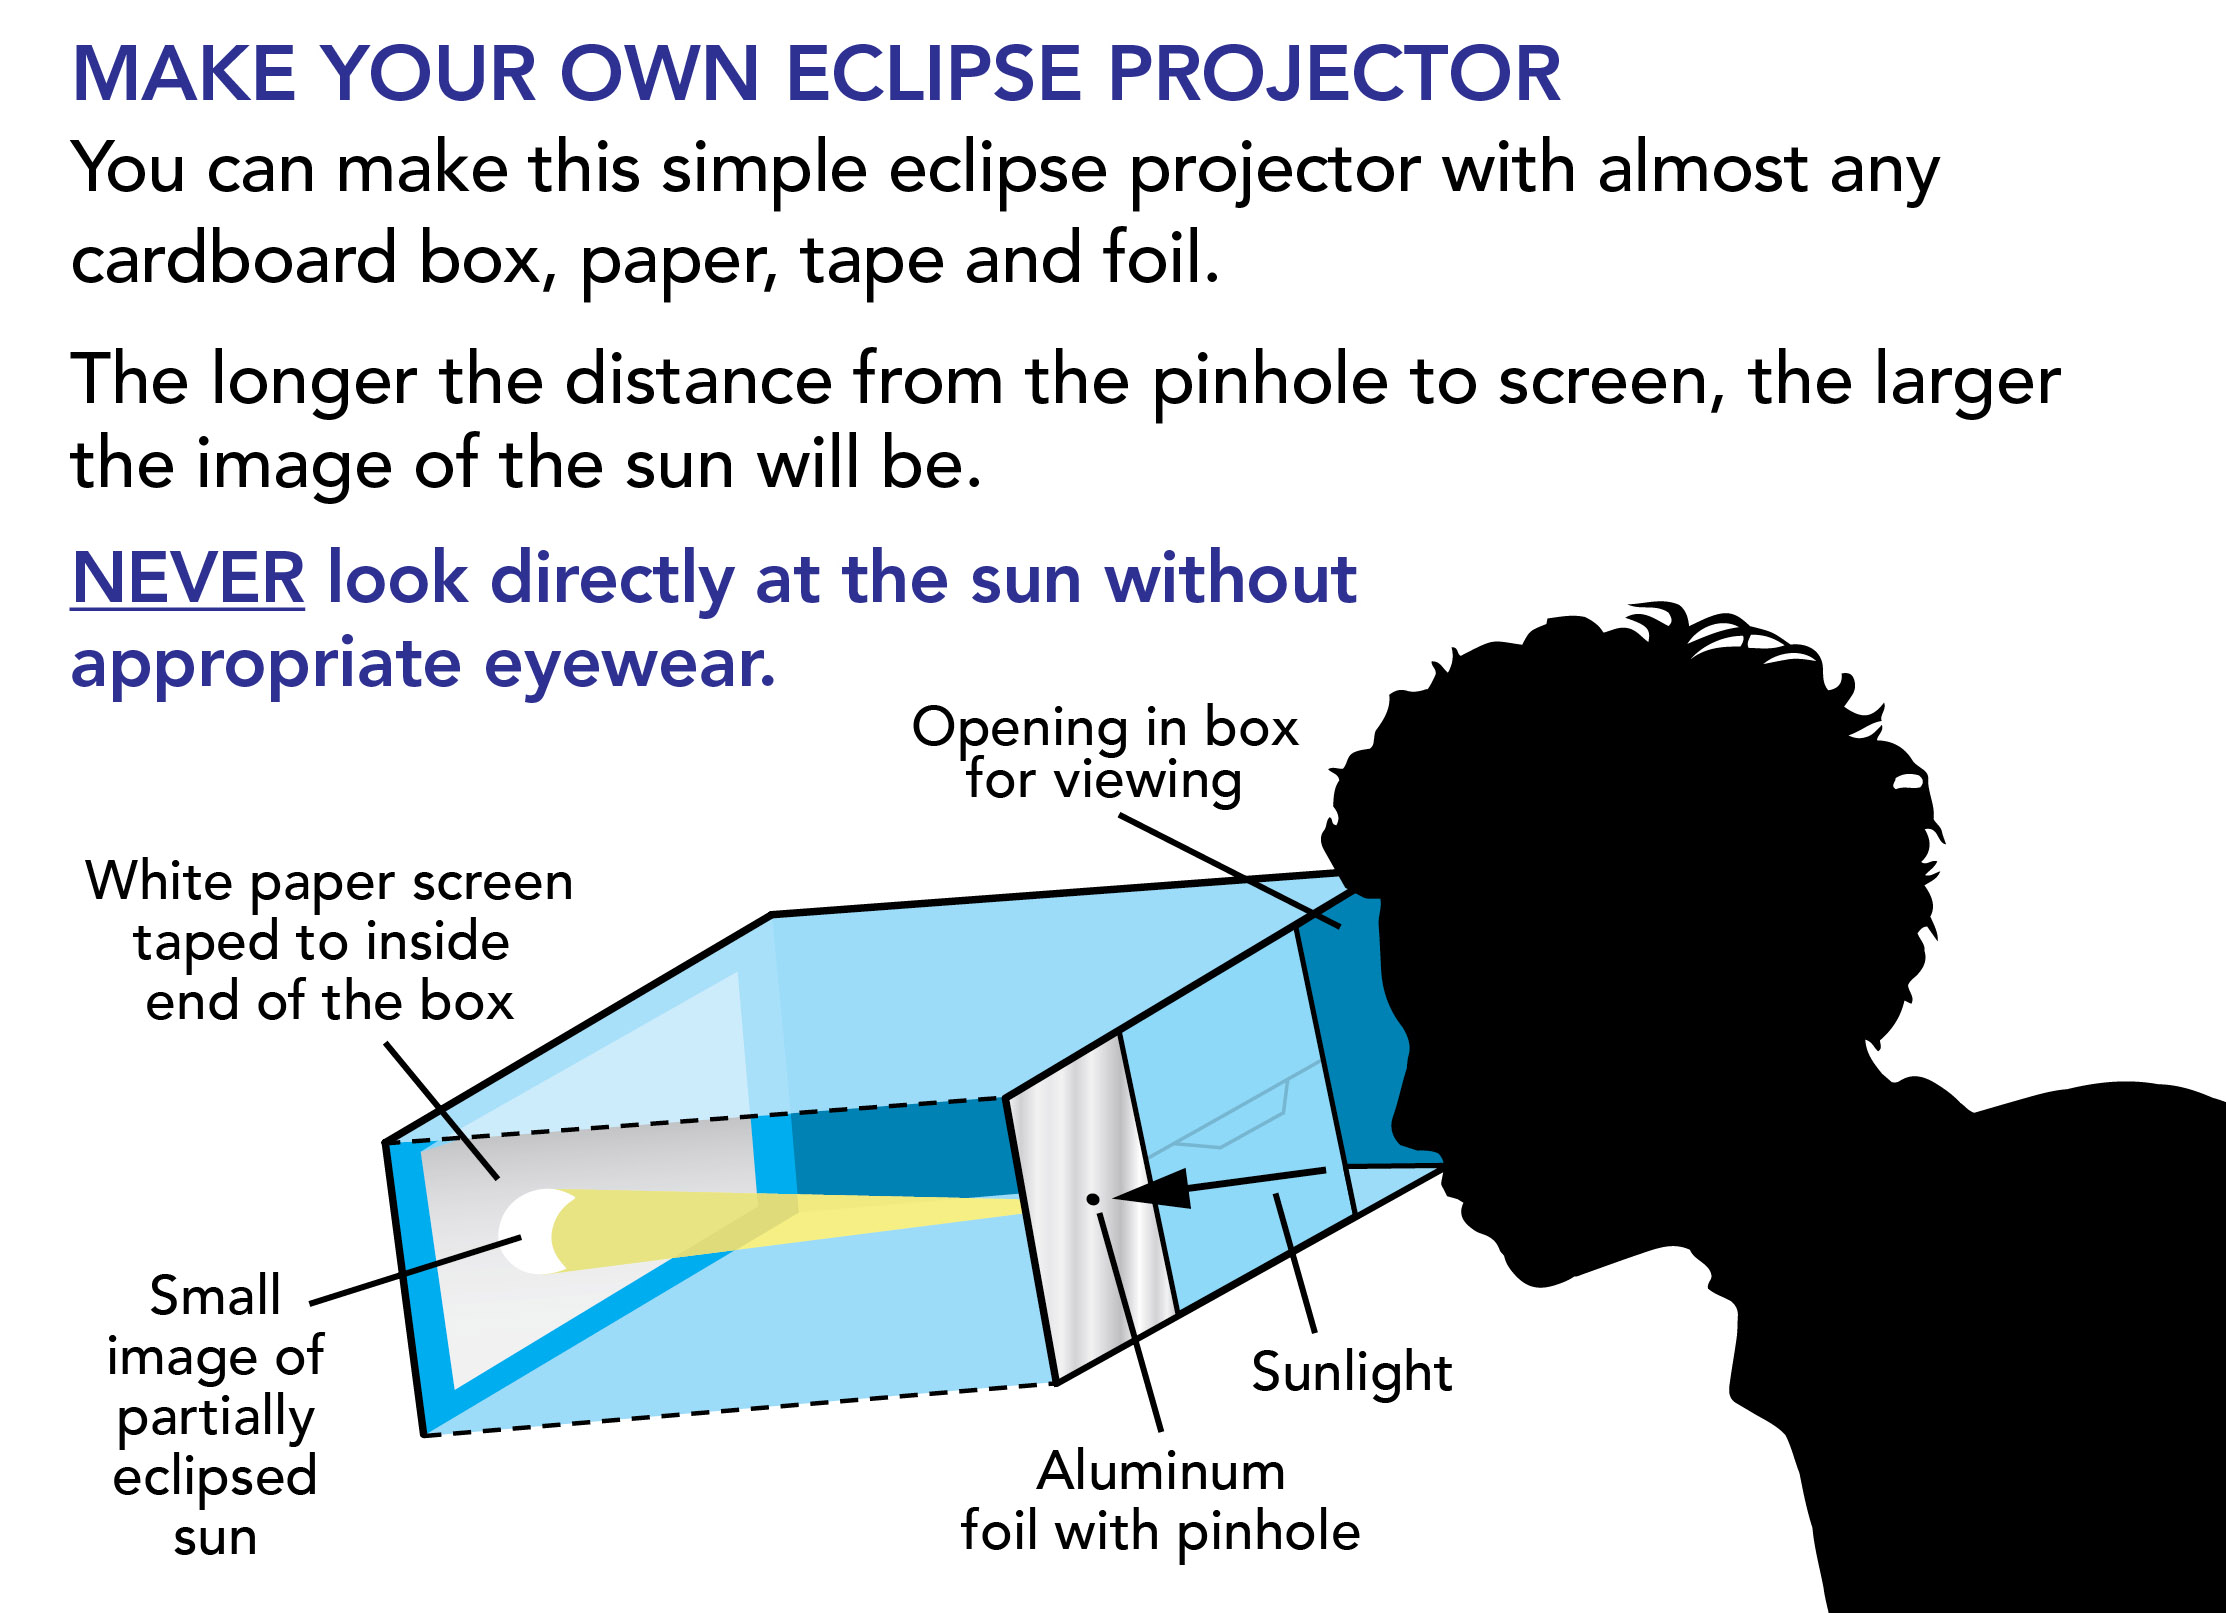 Eclipse projector